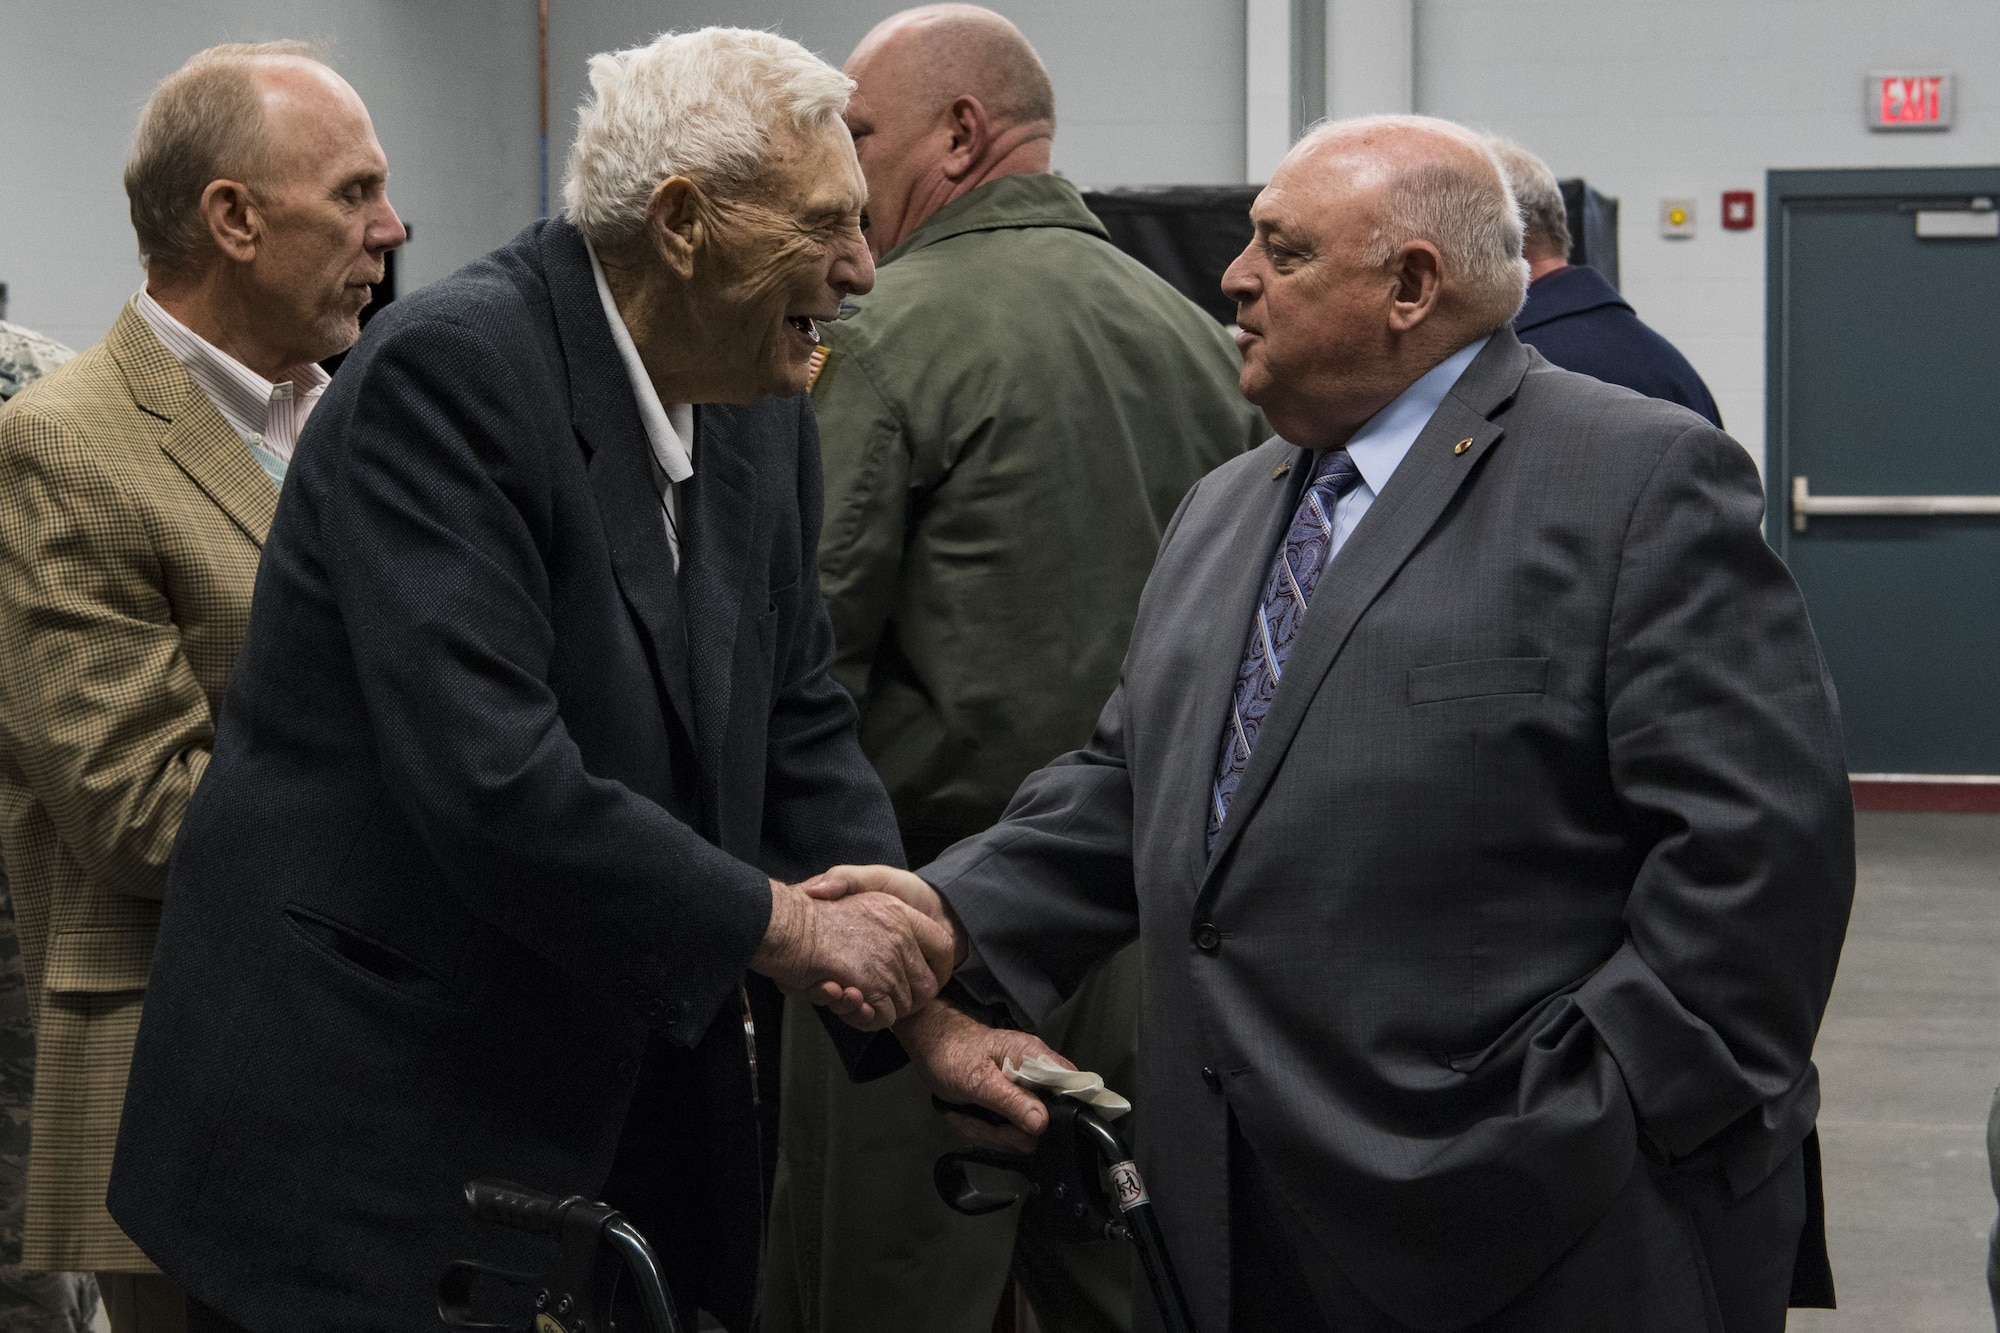 Retired U.S. Air Force Brig. Gen. J. Kemp McLaughlin shakes the hand of Retired U.S. Army Maj. Gen. Allen Tackett at a C-130H plane naming ceremony Dec. 7, 2017 at McLaughlin Air National Guard Base, Charleston, W.Va. The aircraft was given the name “The General Mac” to honor McLaughlin, who founded the West Virginia Air National Guard and was a pilot in World War II with the famous Eight Air Force. (U.S. Air National Guard photo by Airman Caleb Vance)